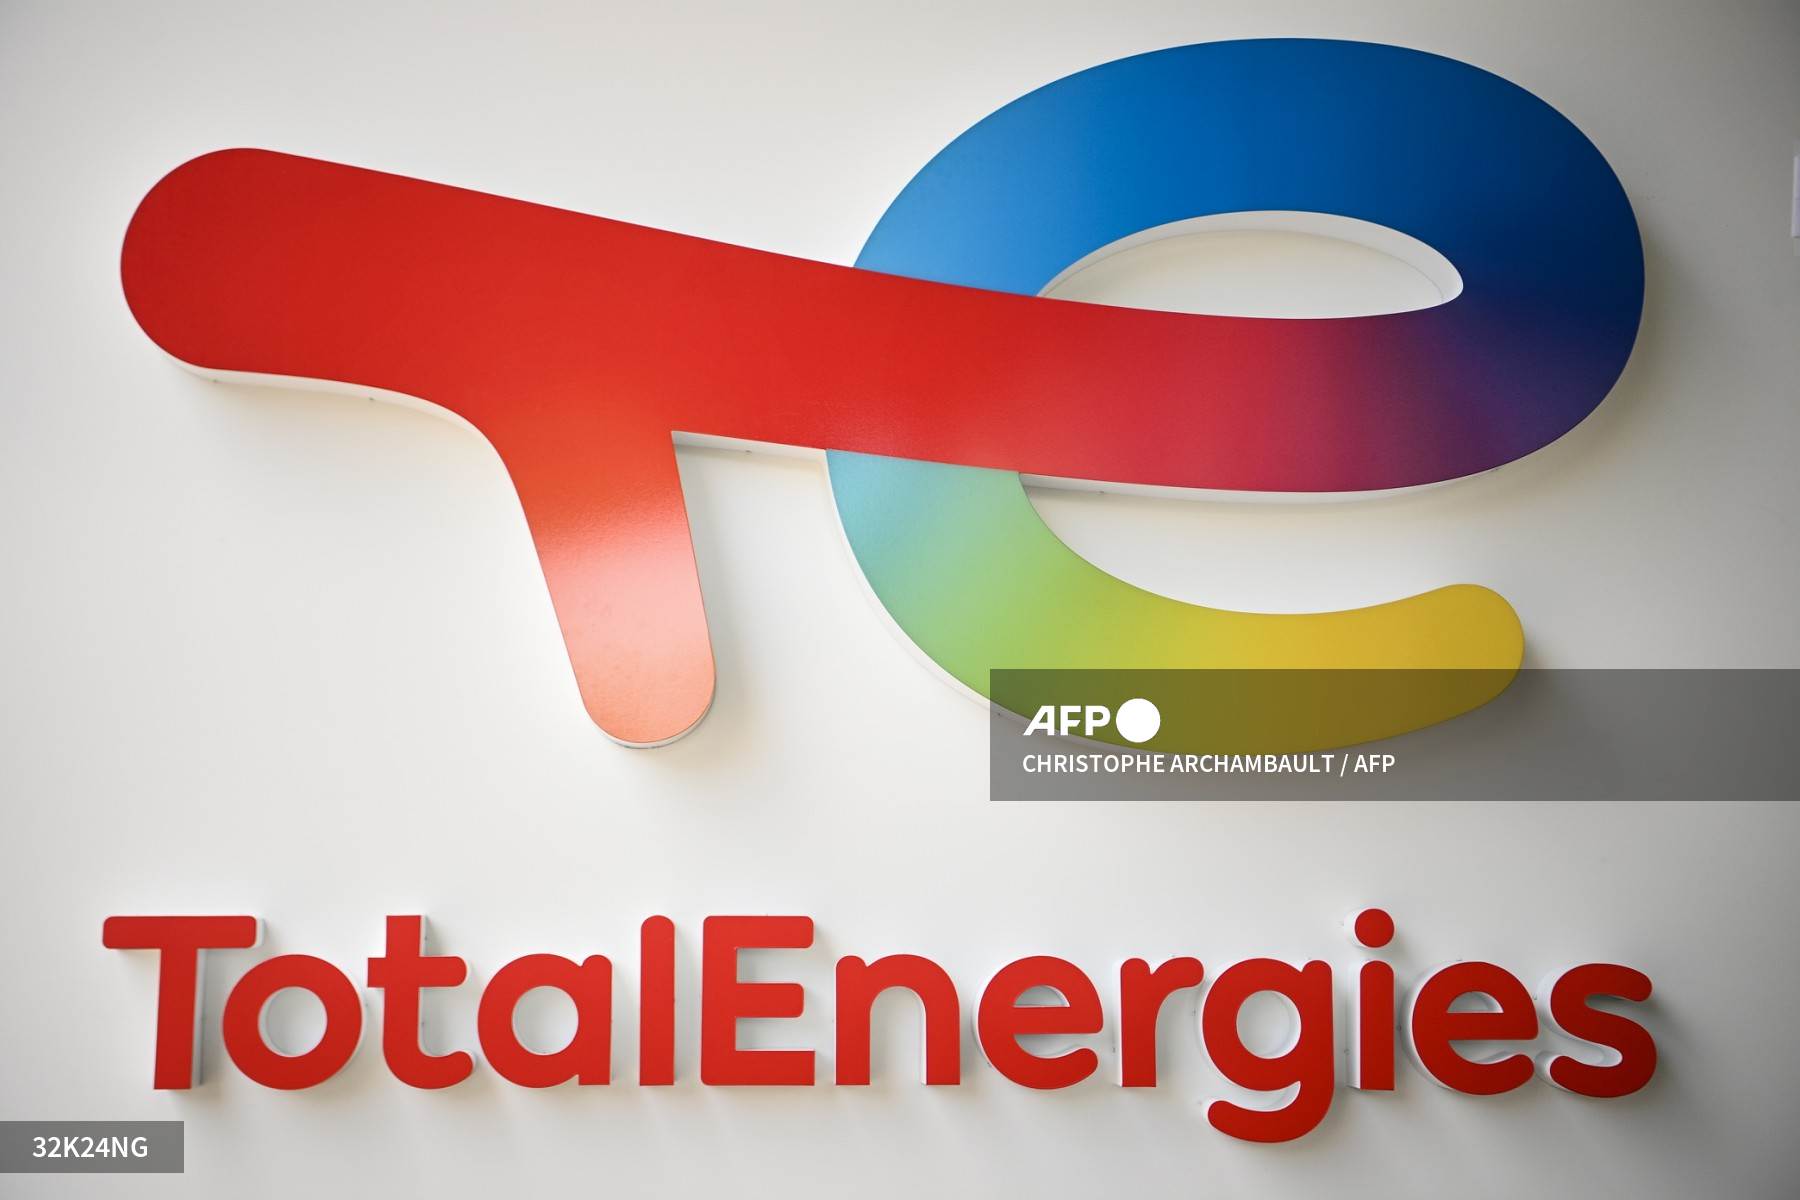 TotalEnergies boosts Qatar's gas expansion with $1.5bn